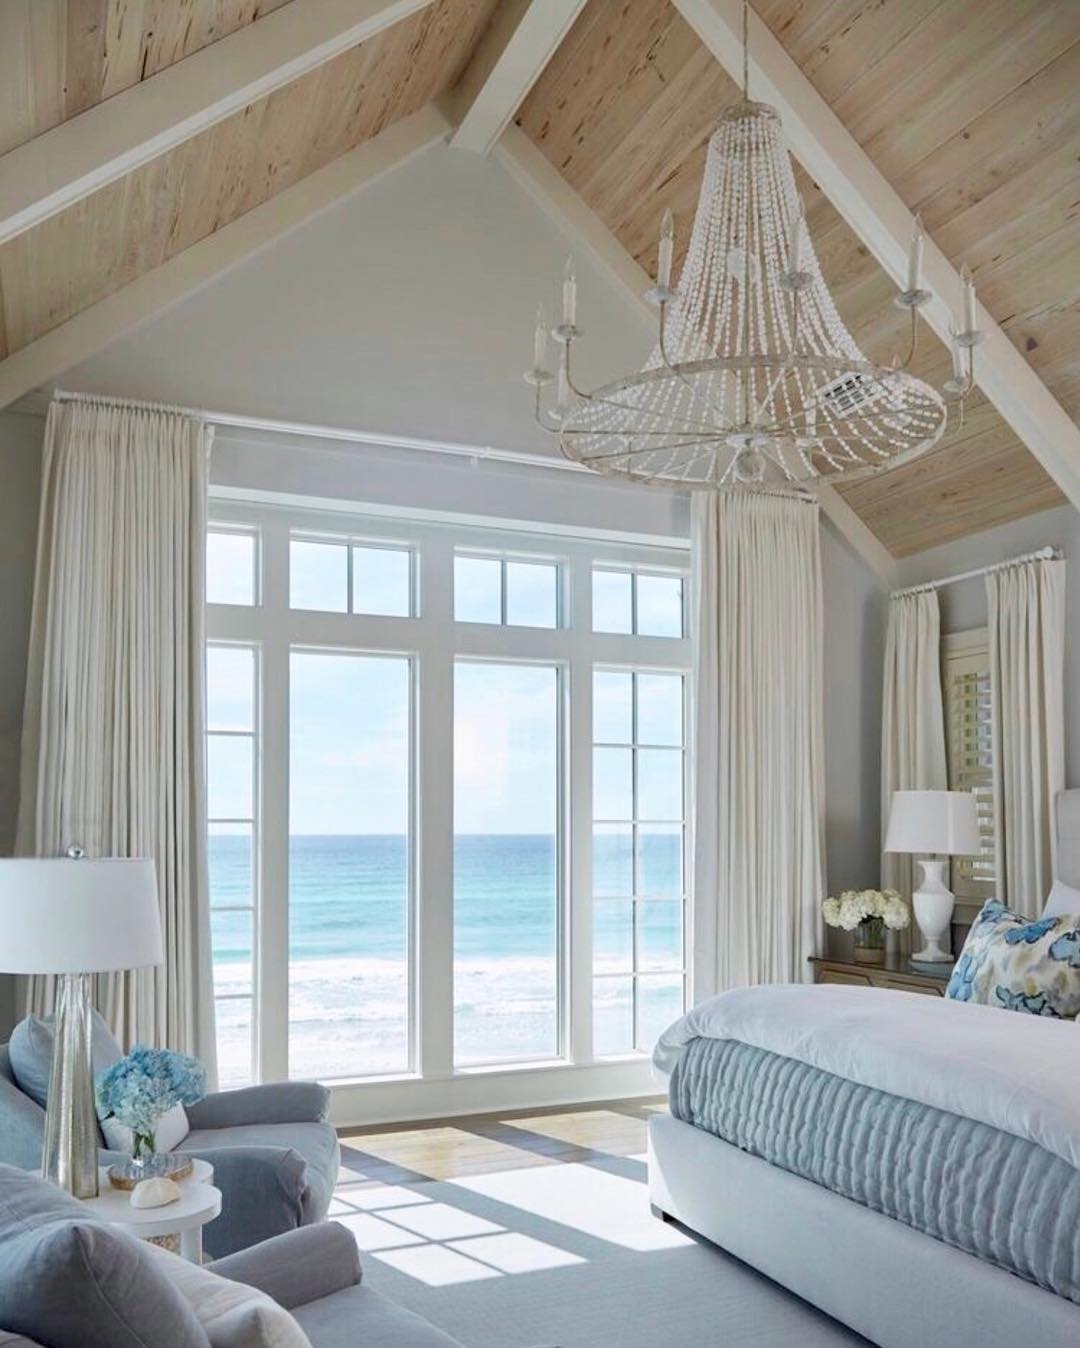 Who else would love to wake up to this view. And those ceilings! Pic by lexi.interiors